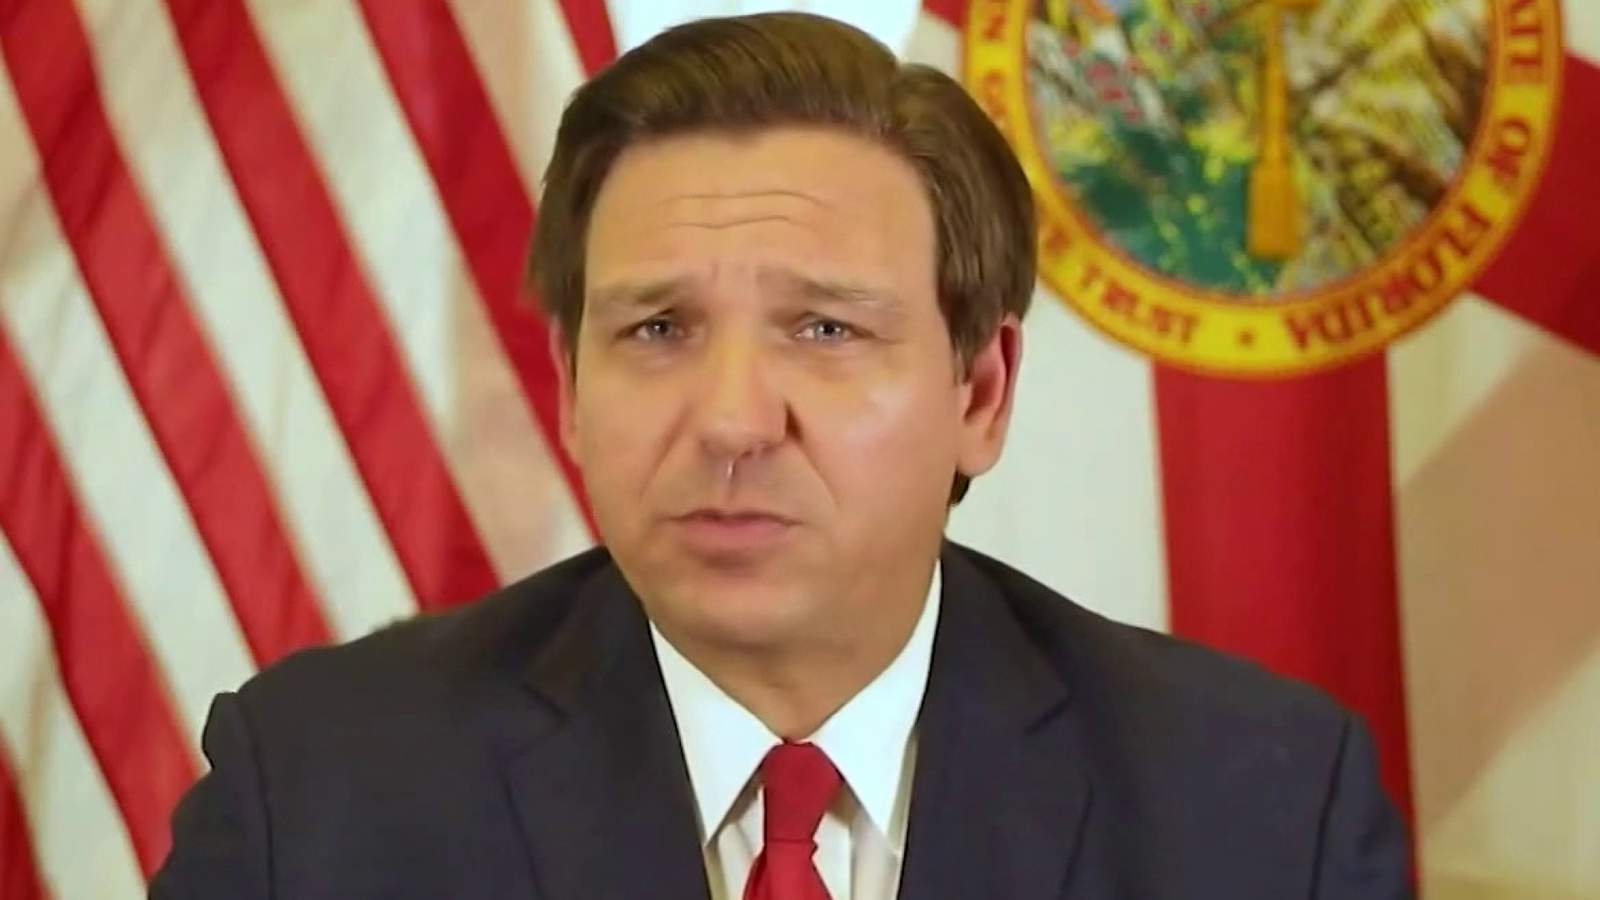 DeSantis: Florida to receive nearly 180,000 of Pfizer’s vaccines